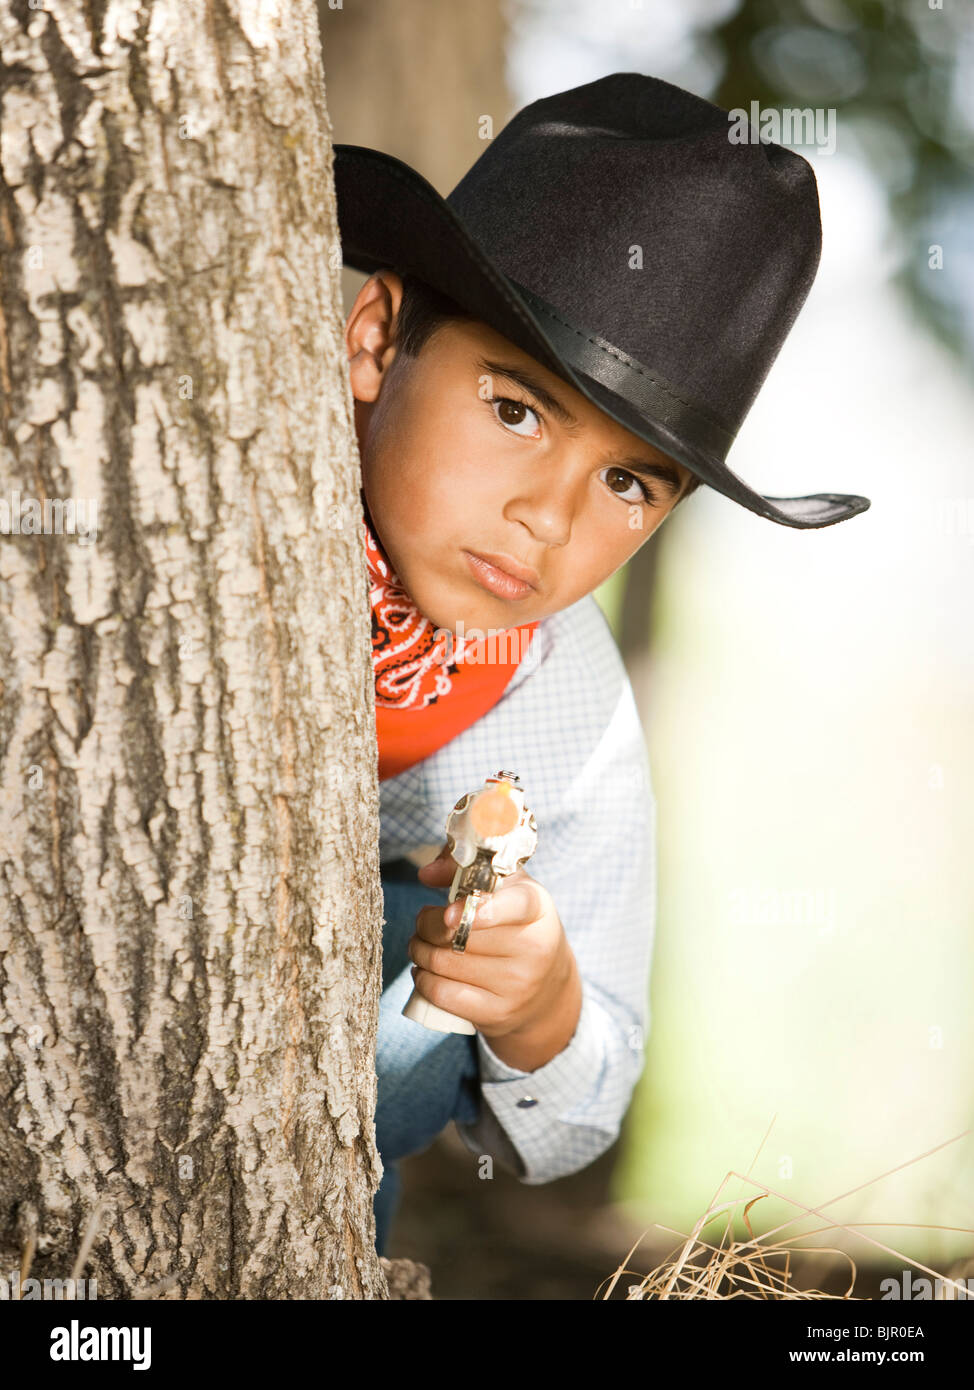 Boy in cowboy costume with toy gun Stock Photo